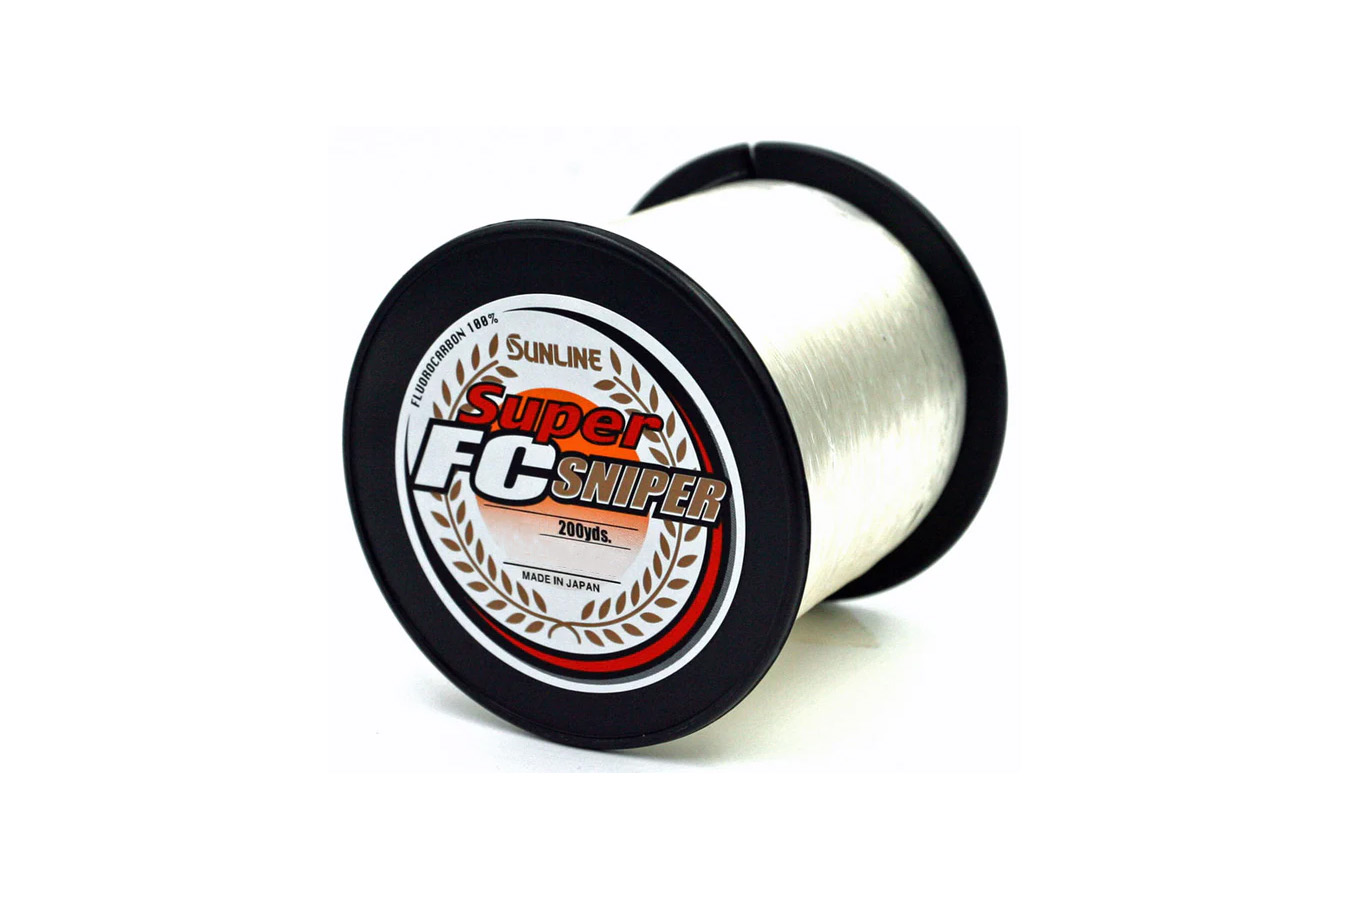 Discount Sunline Super FC Sniper 7lb 200yd Fishing Line - Natural Clear for  Sale, Online Fishing Store